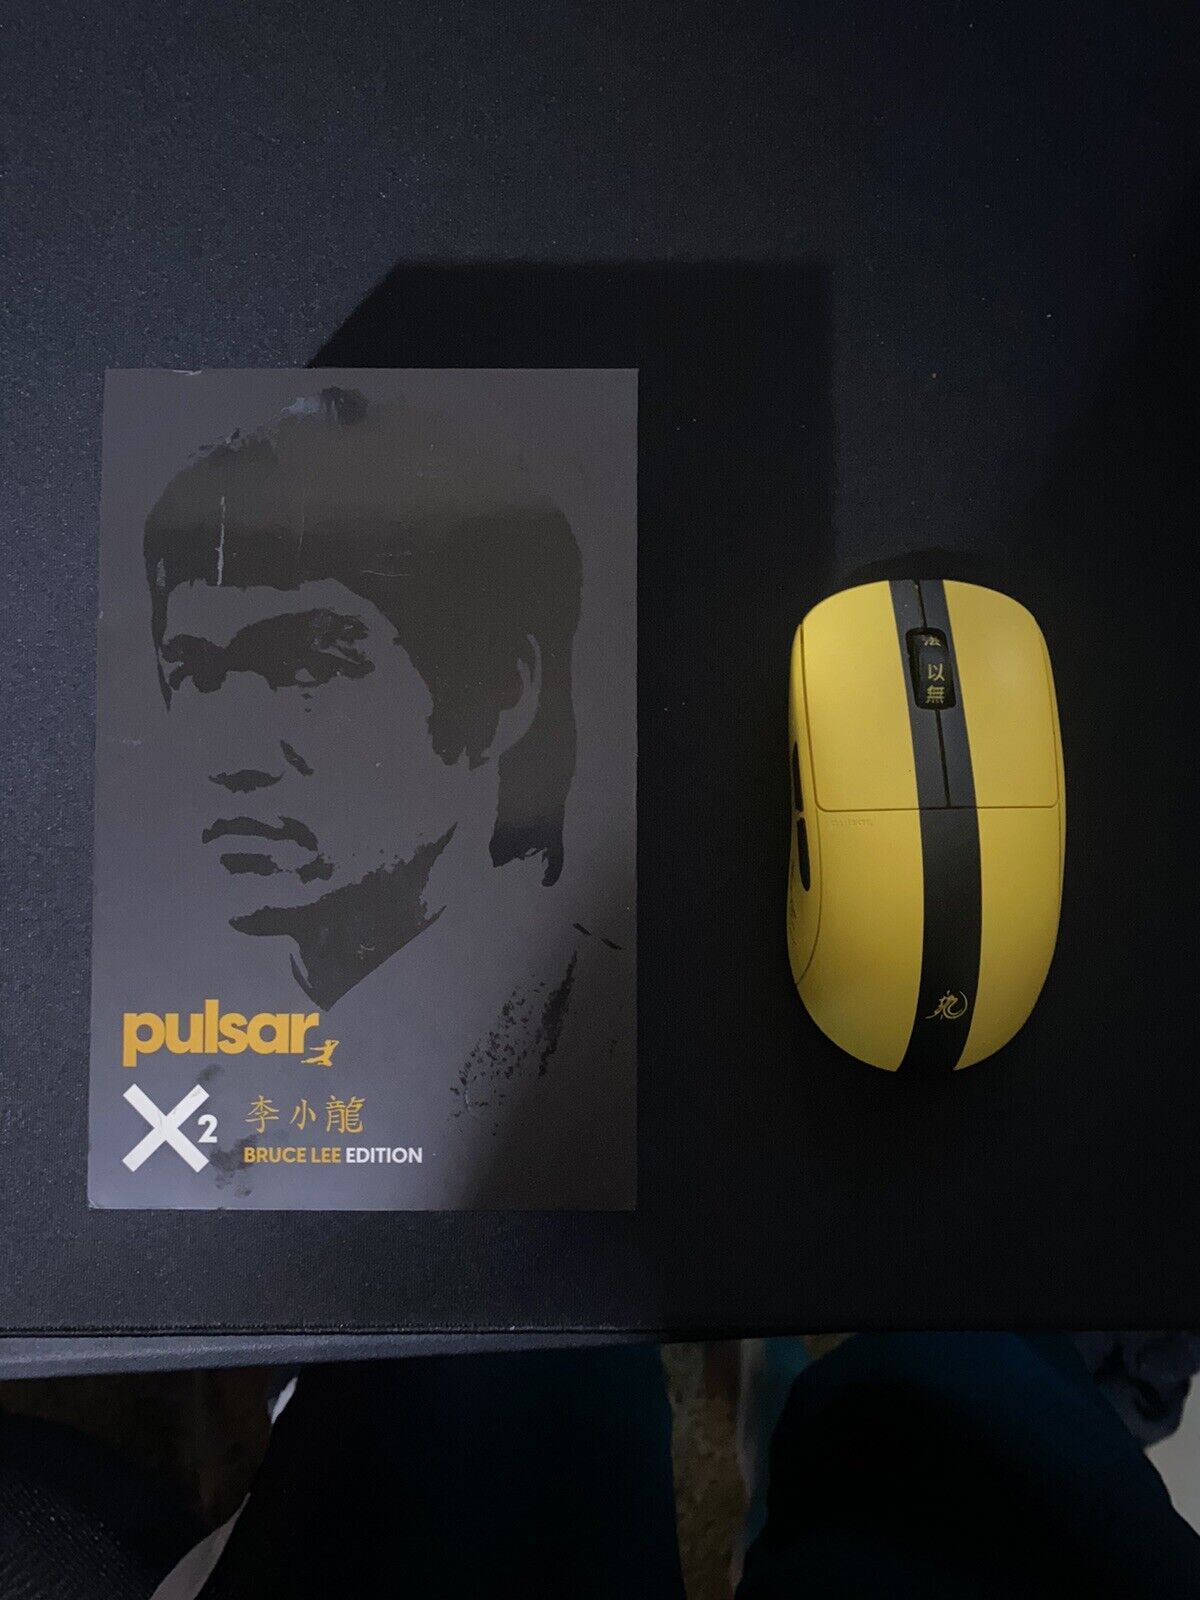 Pulsar Bruce Lee Edition X2 Gaming Mouse - Size 2 Medium